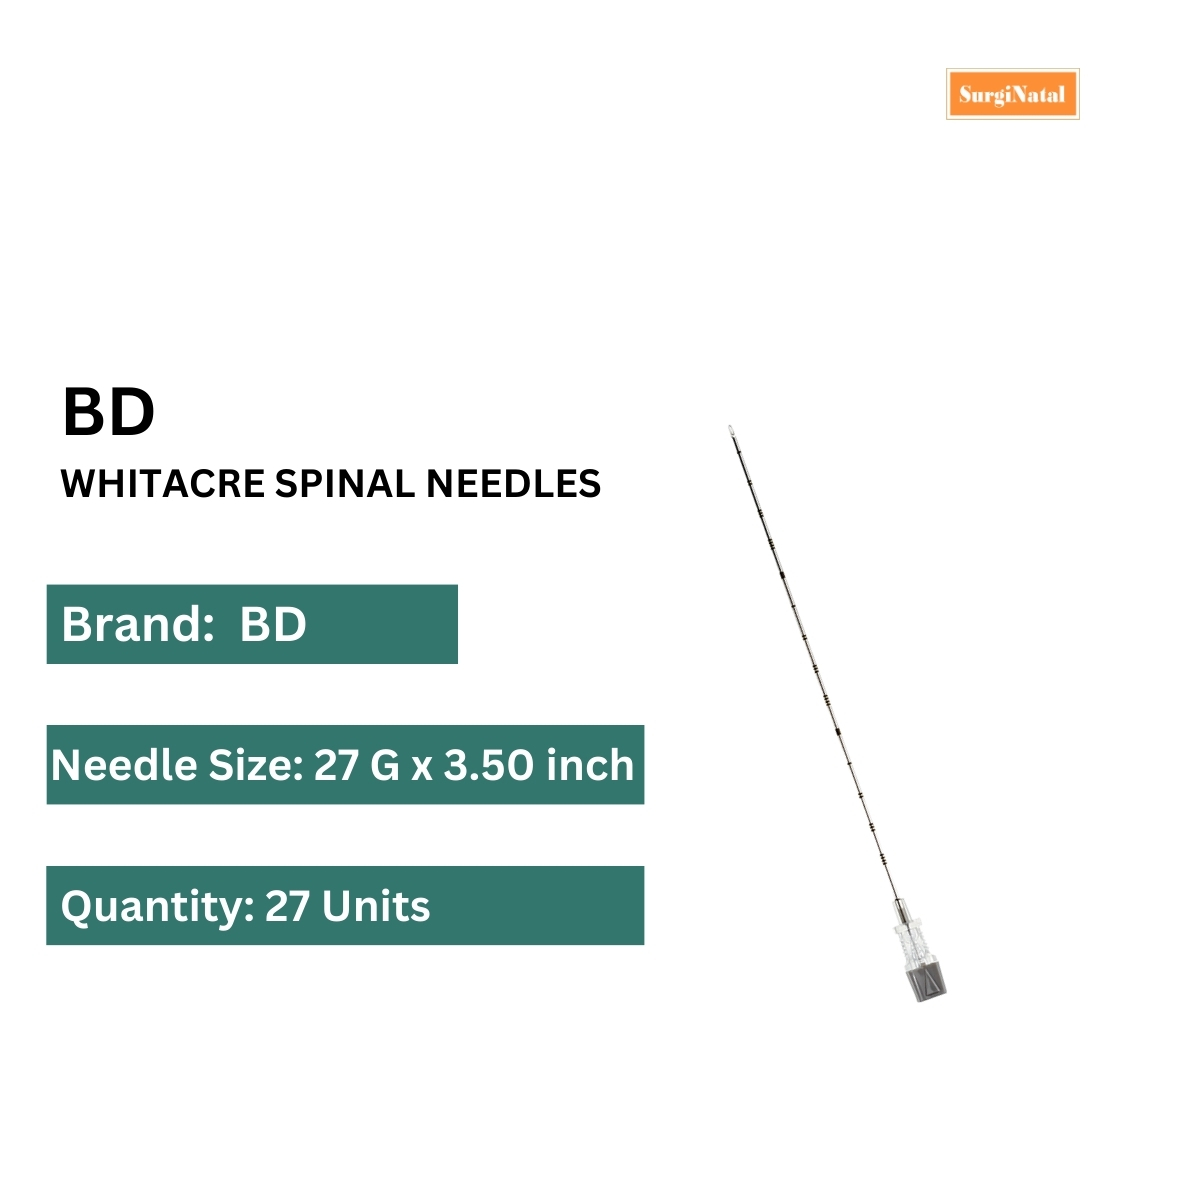 bd whitacre spinal needles 25g 3.50 inch